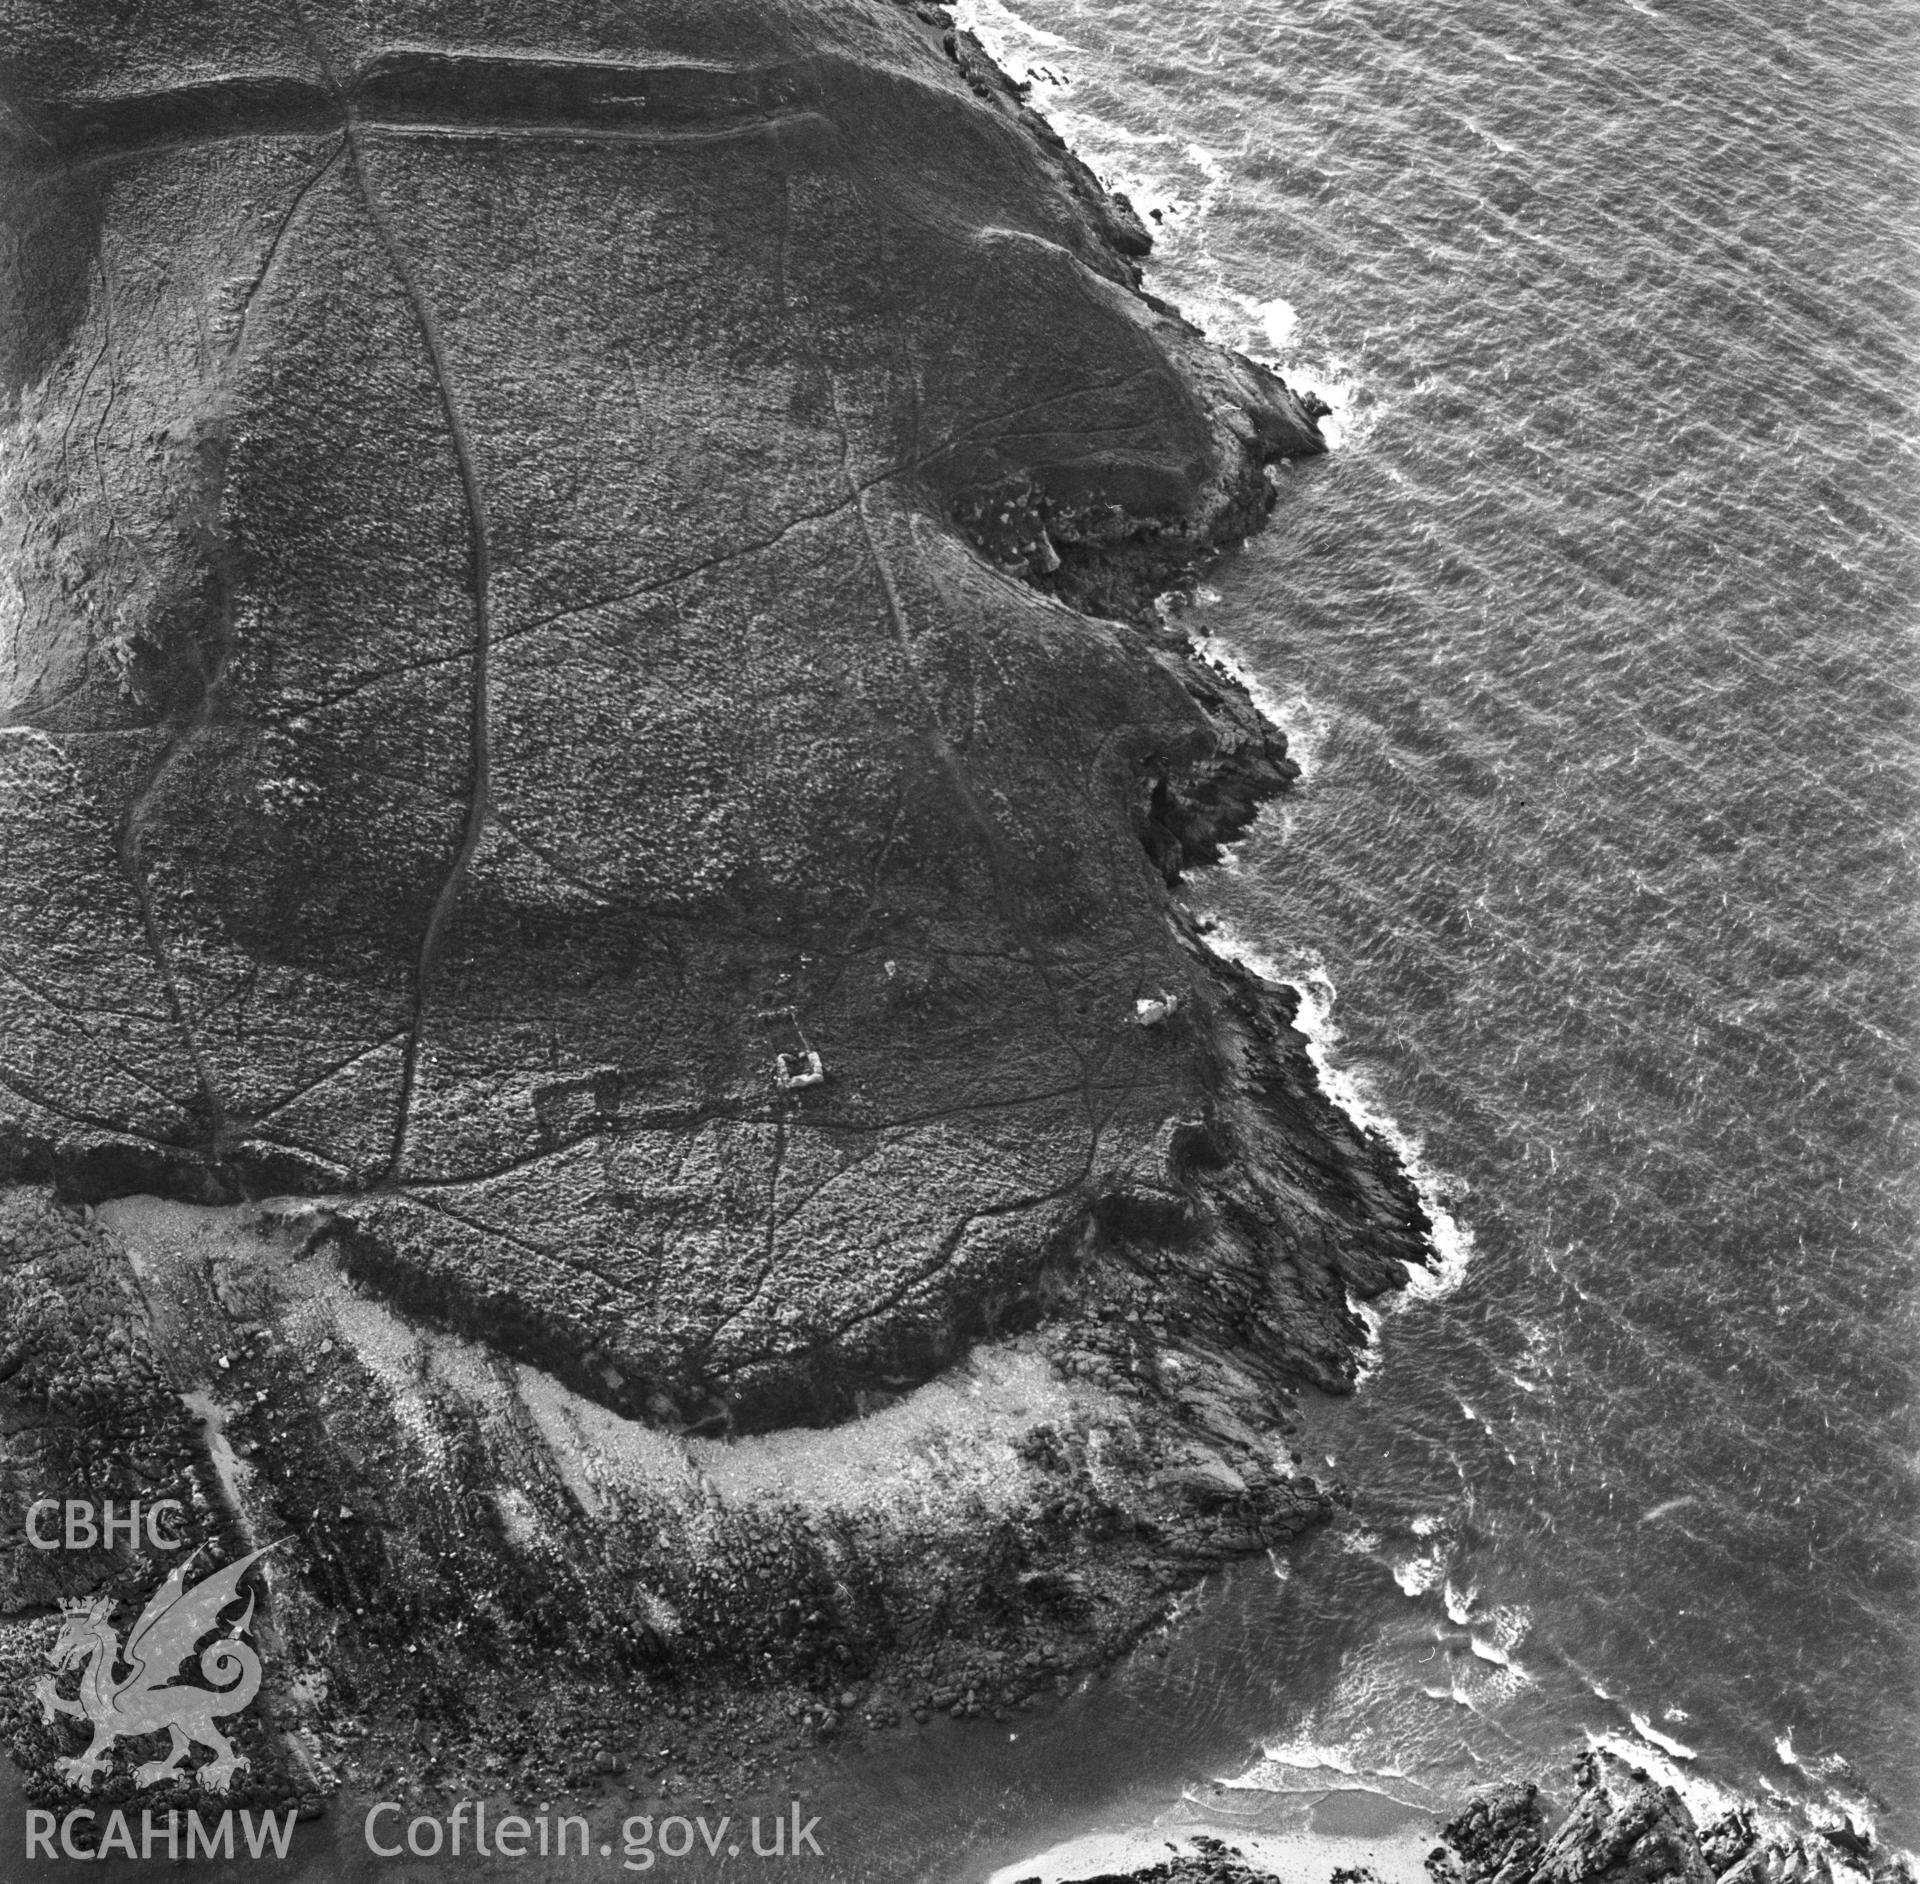 RCAHMW Black and white oblique aerial photograph of medieval hermitage site on Burry Holms, Llanmadog and Cheriton, taken by CR Musson on 14/09/88